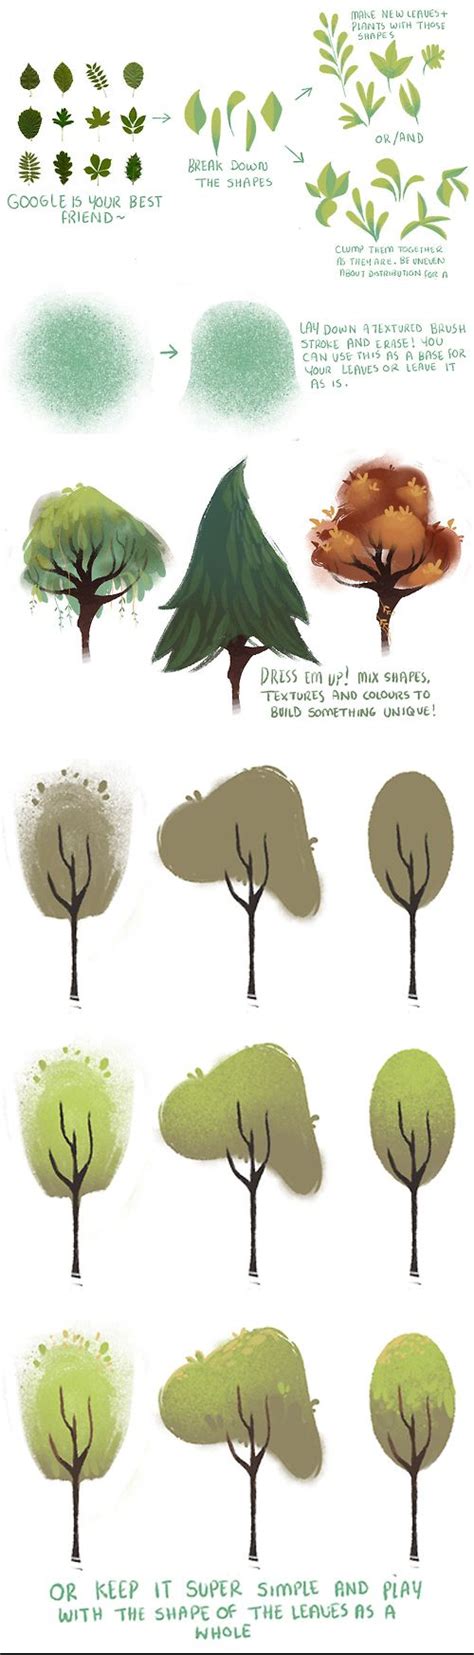 Super Simple Stylized Tree Tutorial You Can Download The Brushes Here